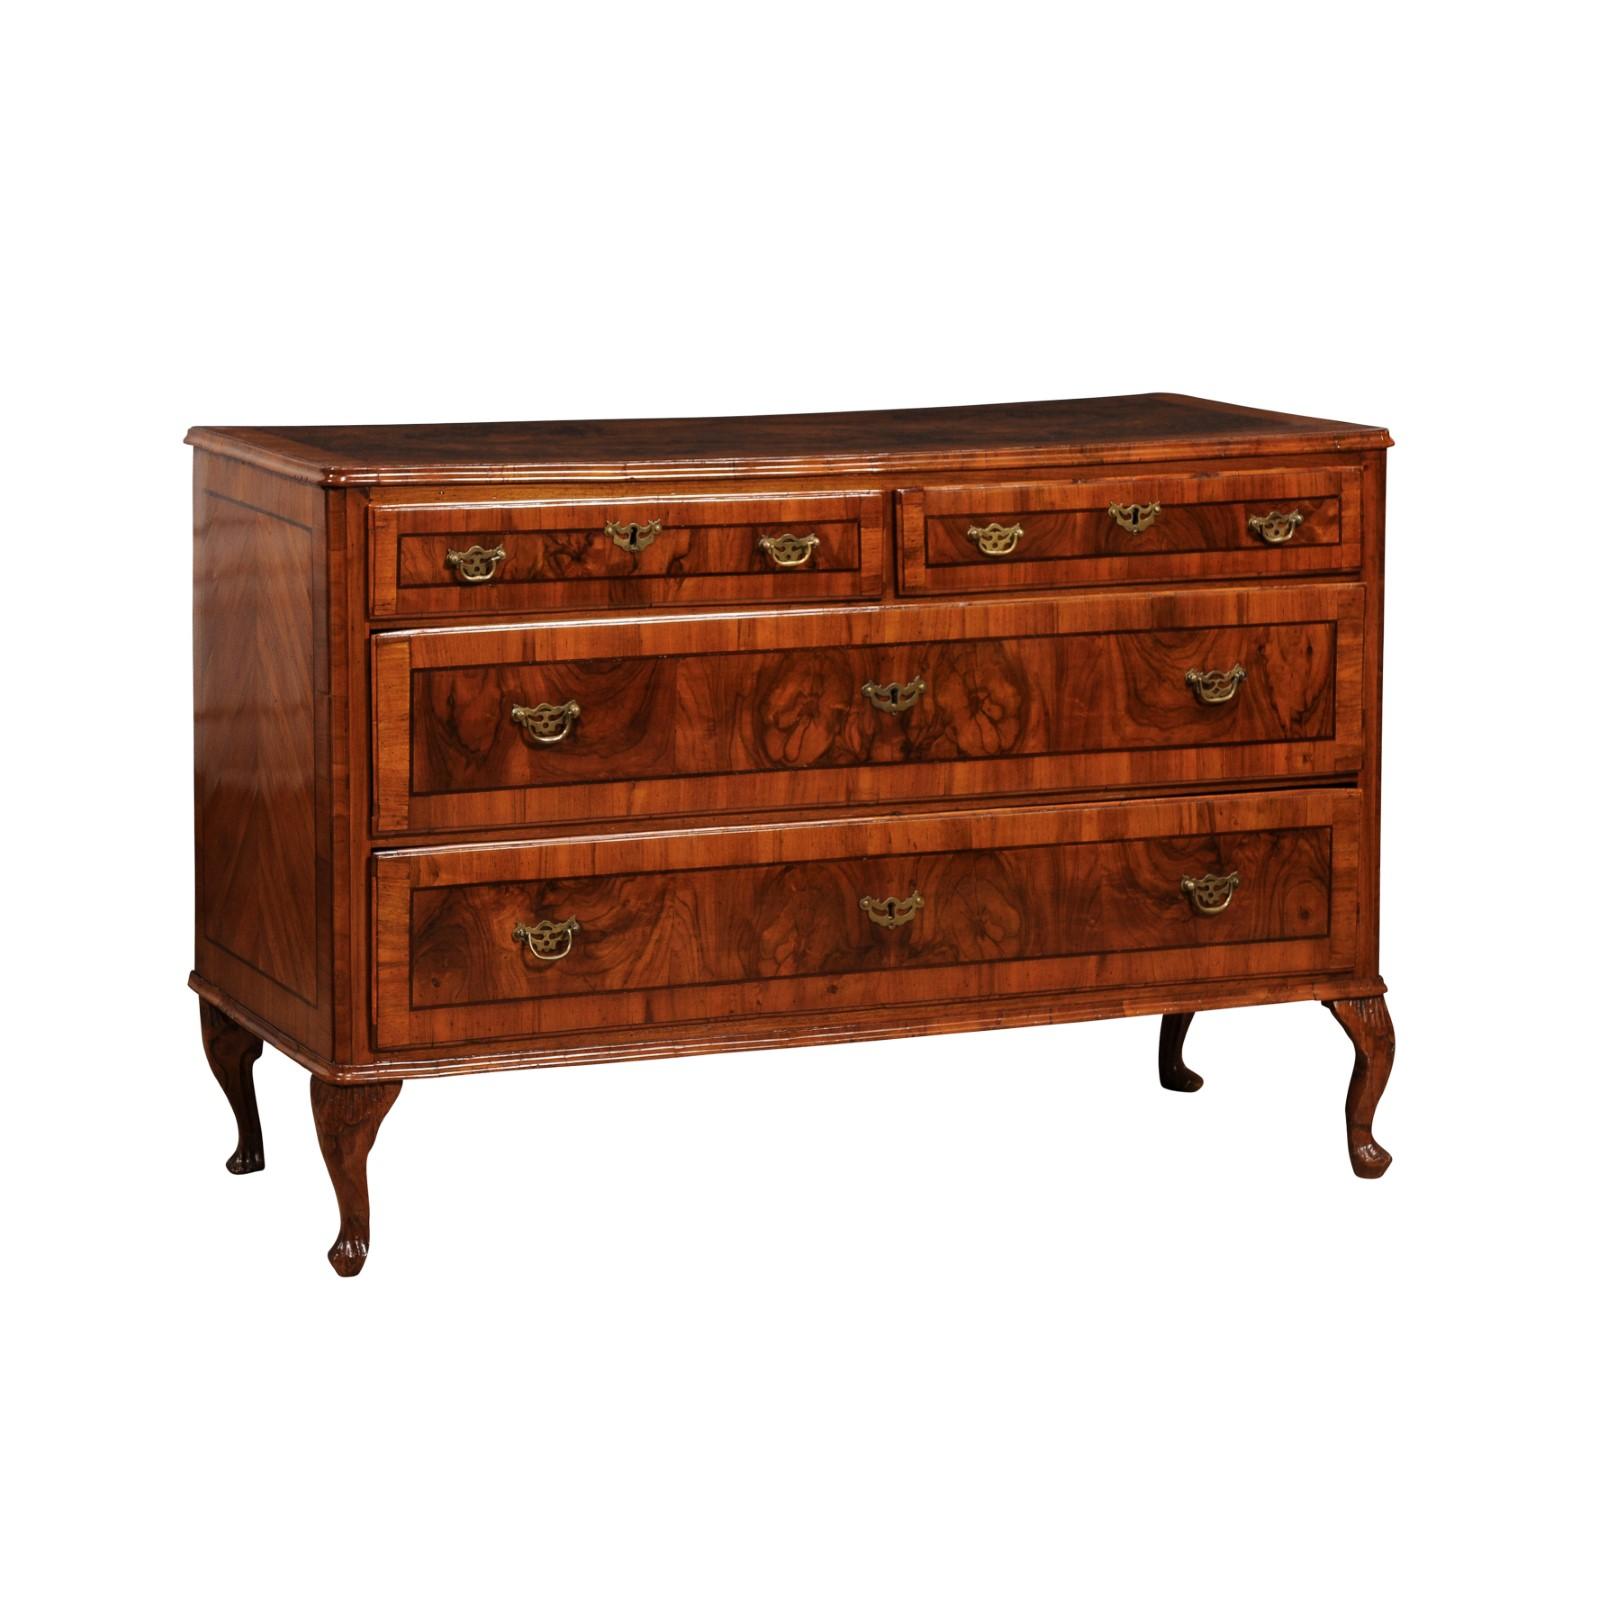 A Venetian walnut and mahogany commode from the 18th century with four drawers, bookmatched veneer, cross banding and cabriole legs. This Venetian walnut and mahogany commode from the 18th century is a testament to the opulent craftsmanship of the